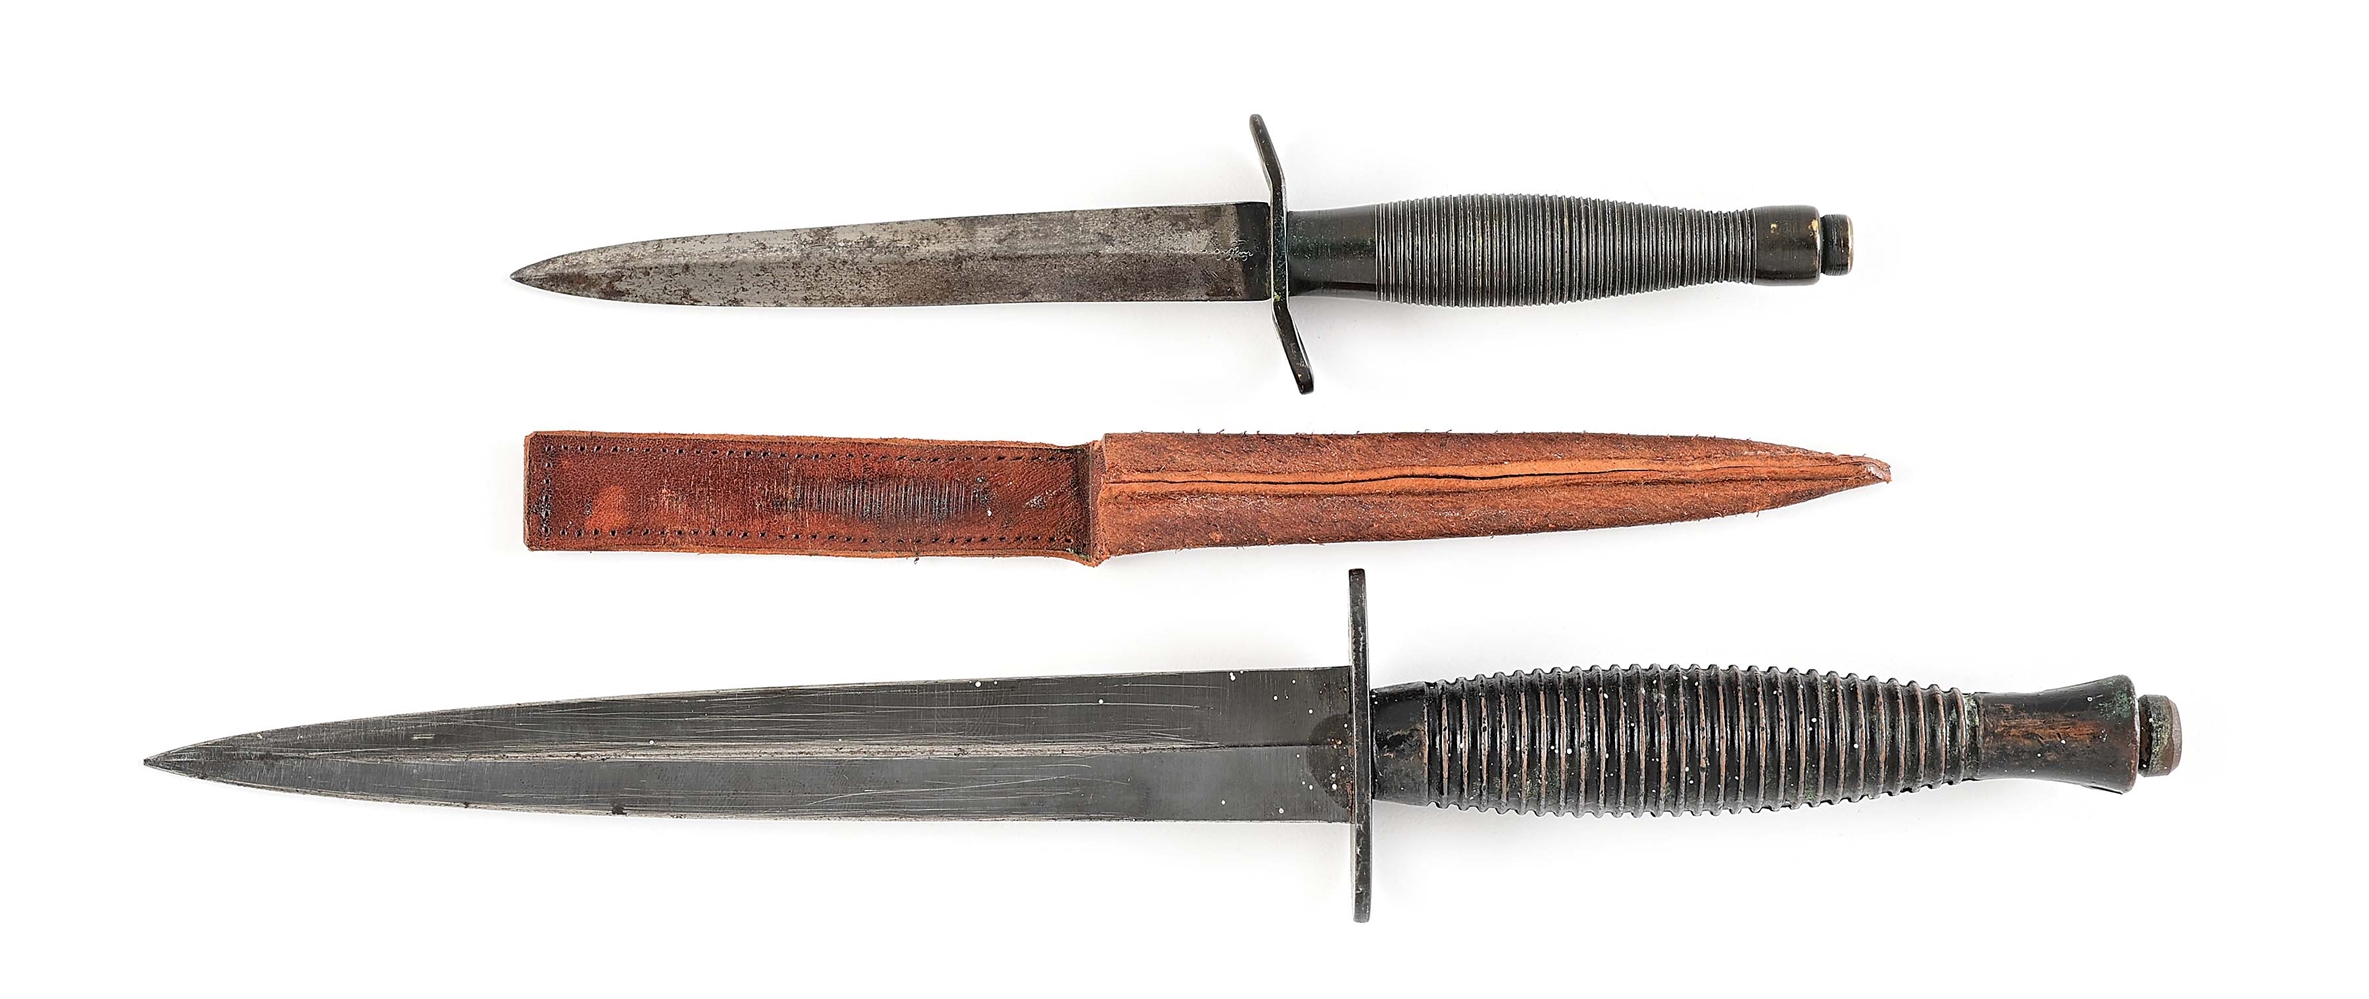 LOT OF 2: FAIRBAIRN-SYKES STYLE DAGGERS INCLUDING TWO-THIRDS SCALE VERSION